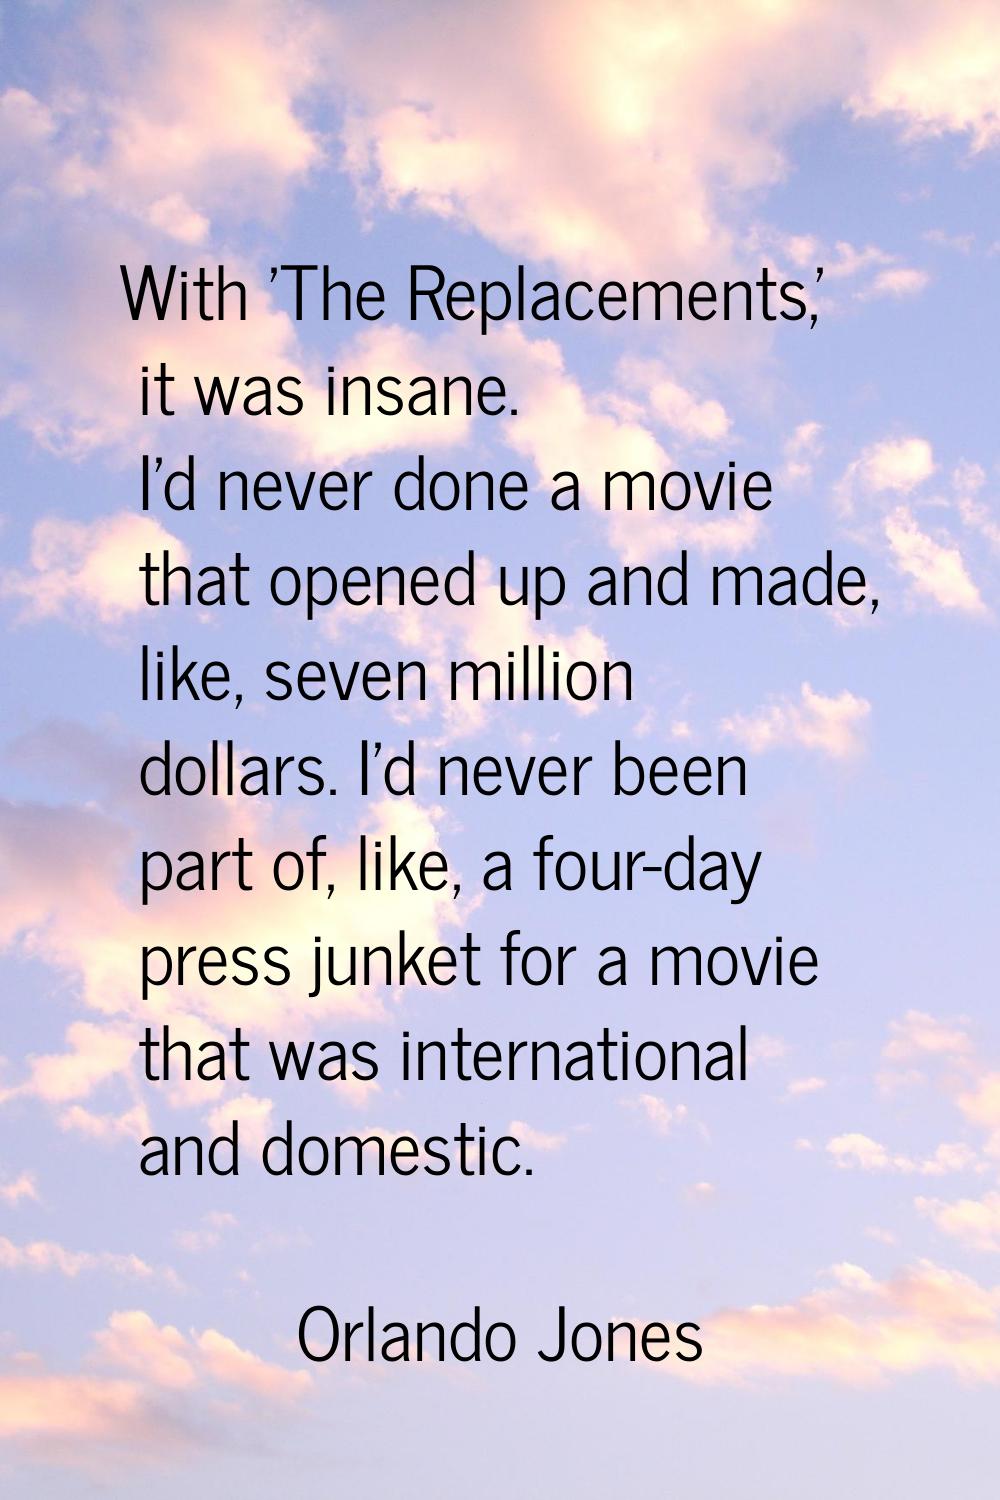 With 'The Replacements,' it was insane. I'd never done a movie that opened up and made, like, seven